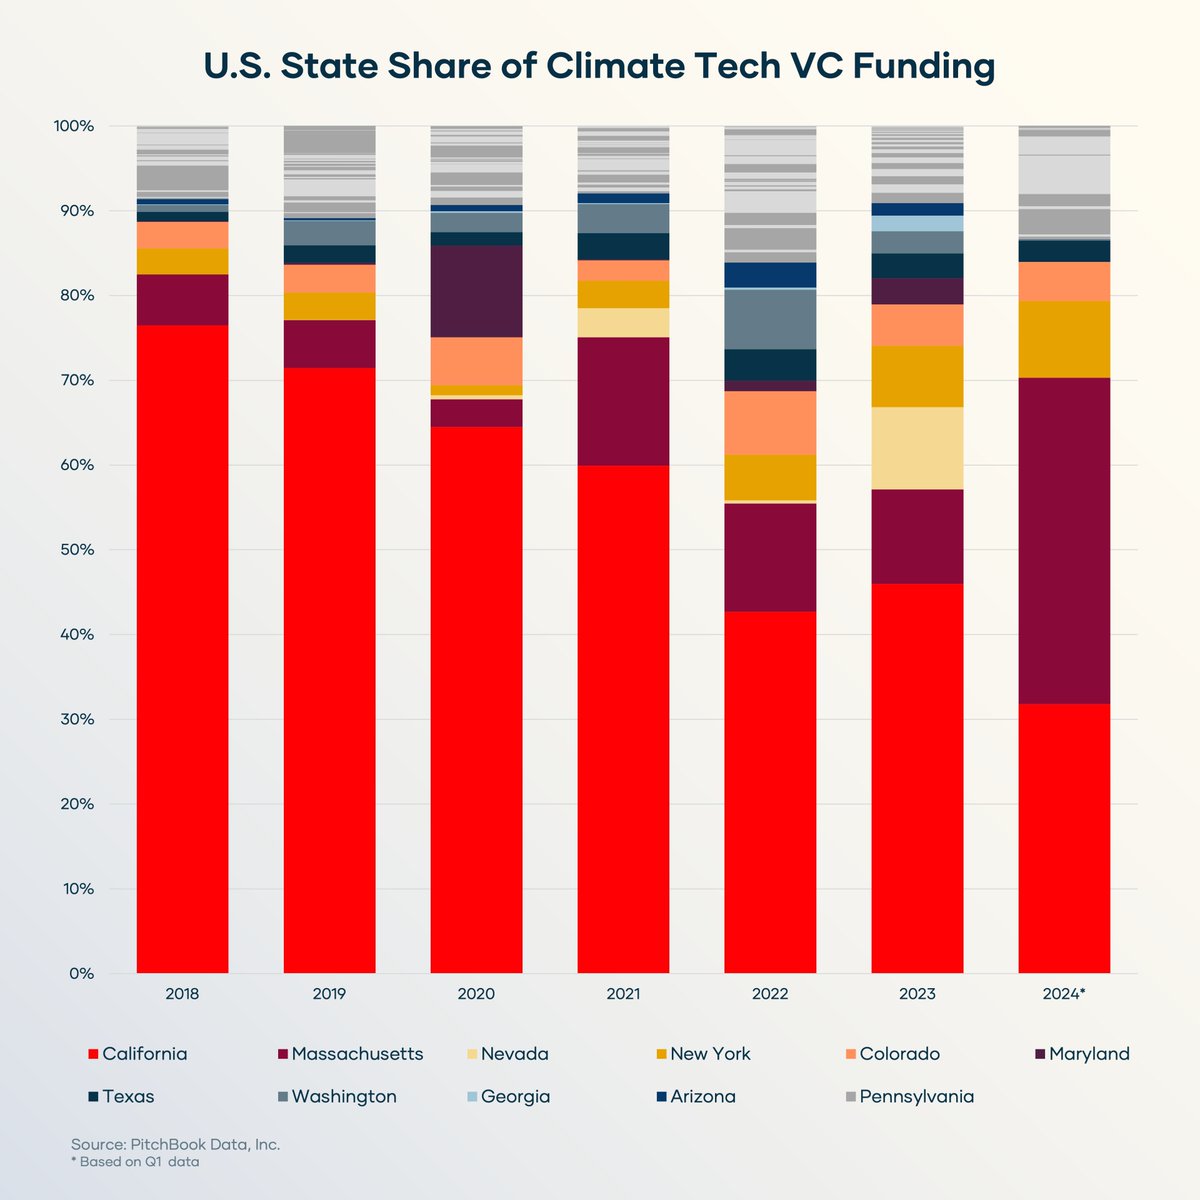 TL;DR: The geography of #climatetech is becoming more distributed 🗺️📍👀

In the last half-decade, California’s grip on climate tech VC dollars has waned significantly, with its share of funding falling from 76% in 2018 to less than 46% in 2023.